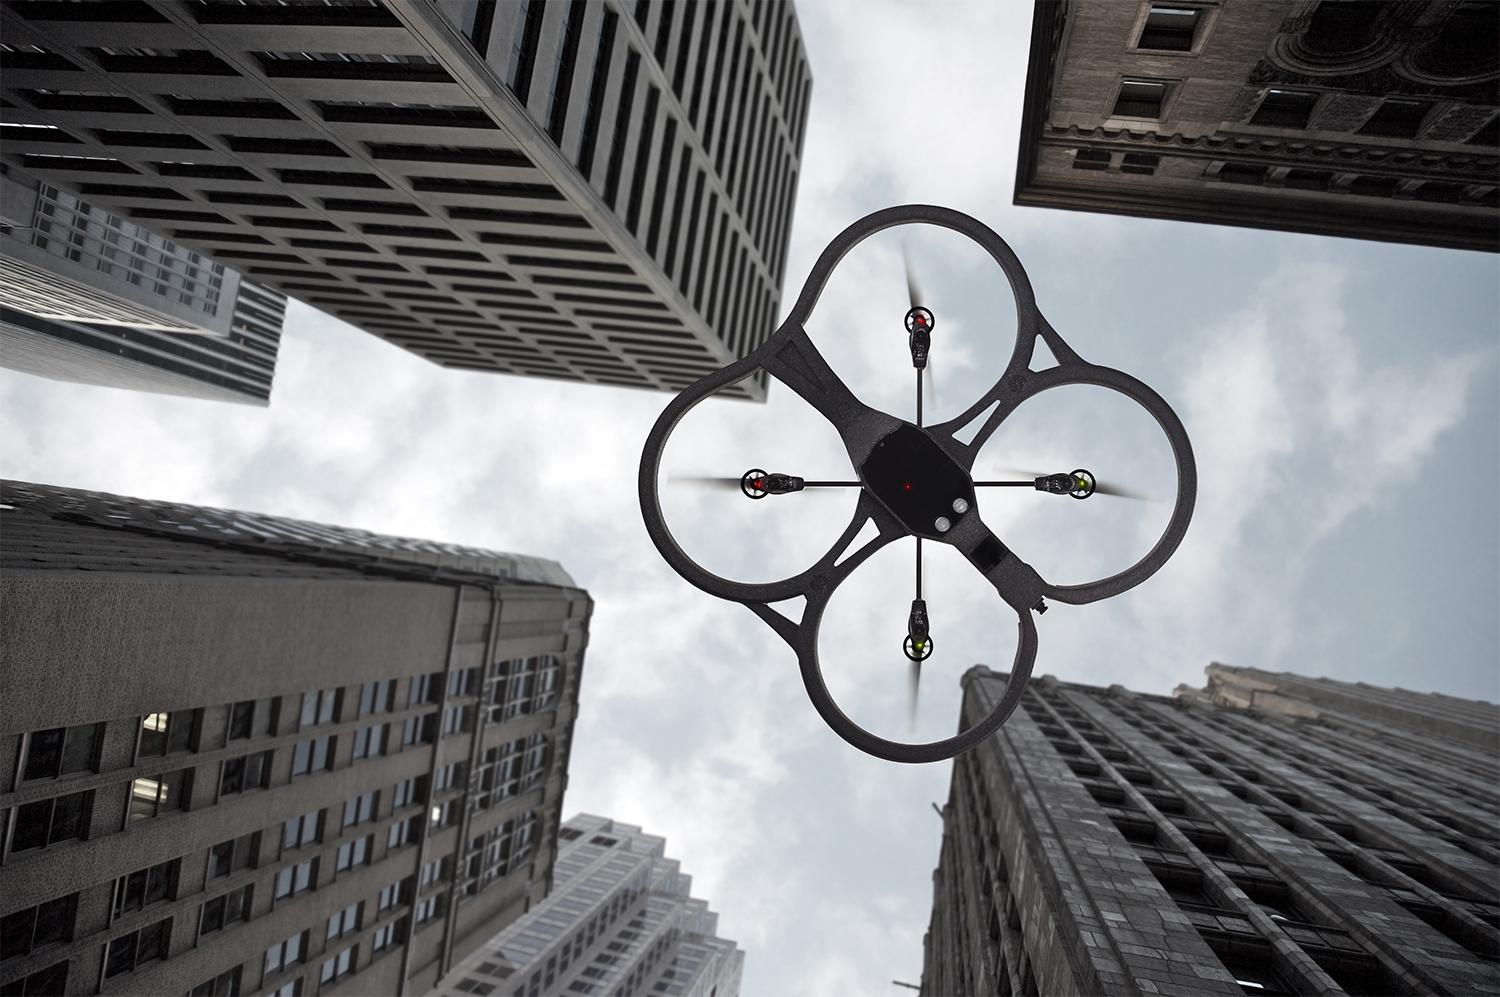 samsung may be developing a drone geared toward selfie shooters